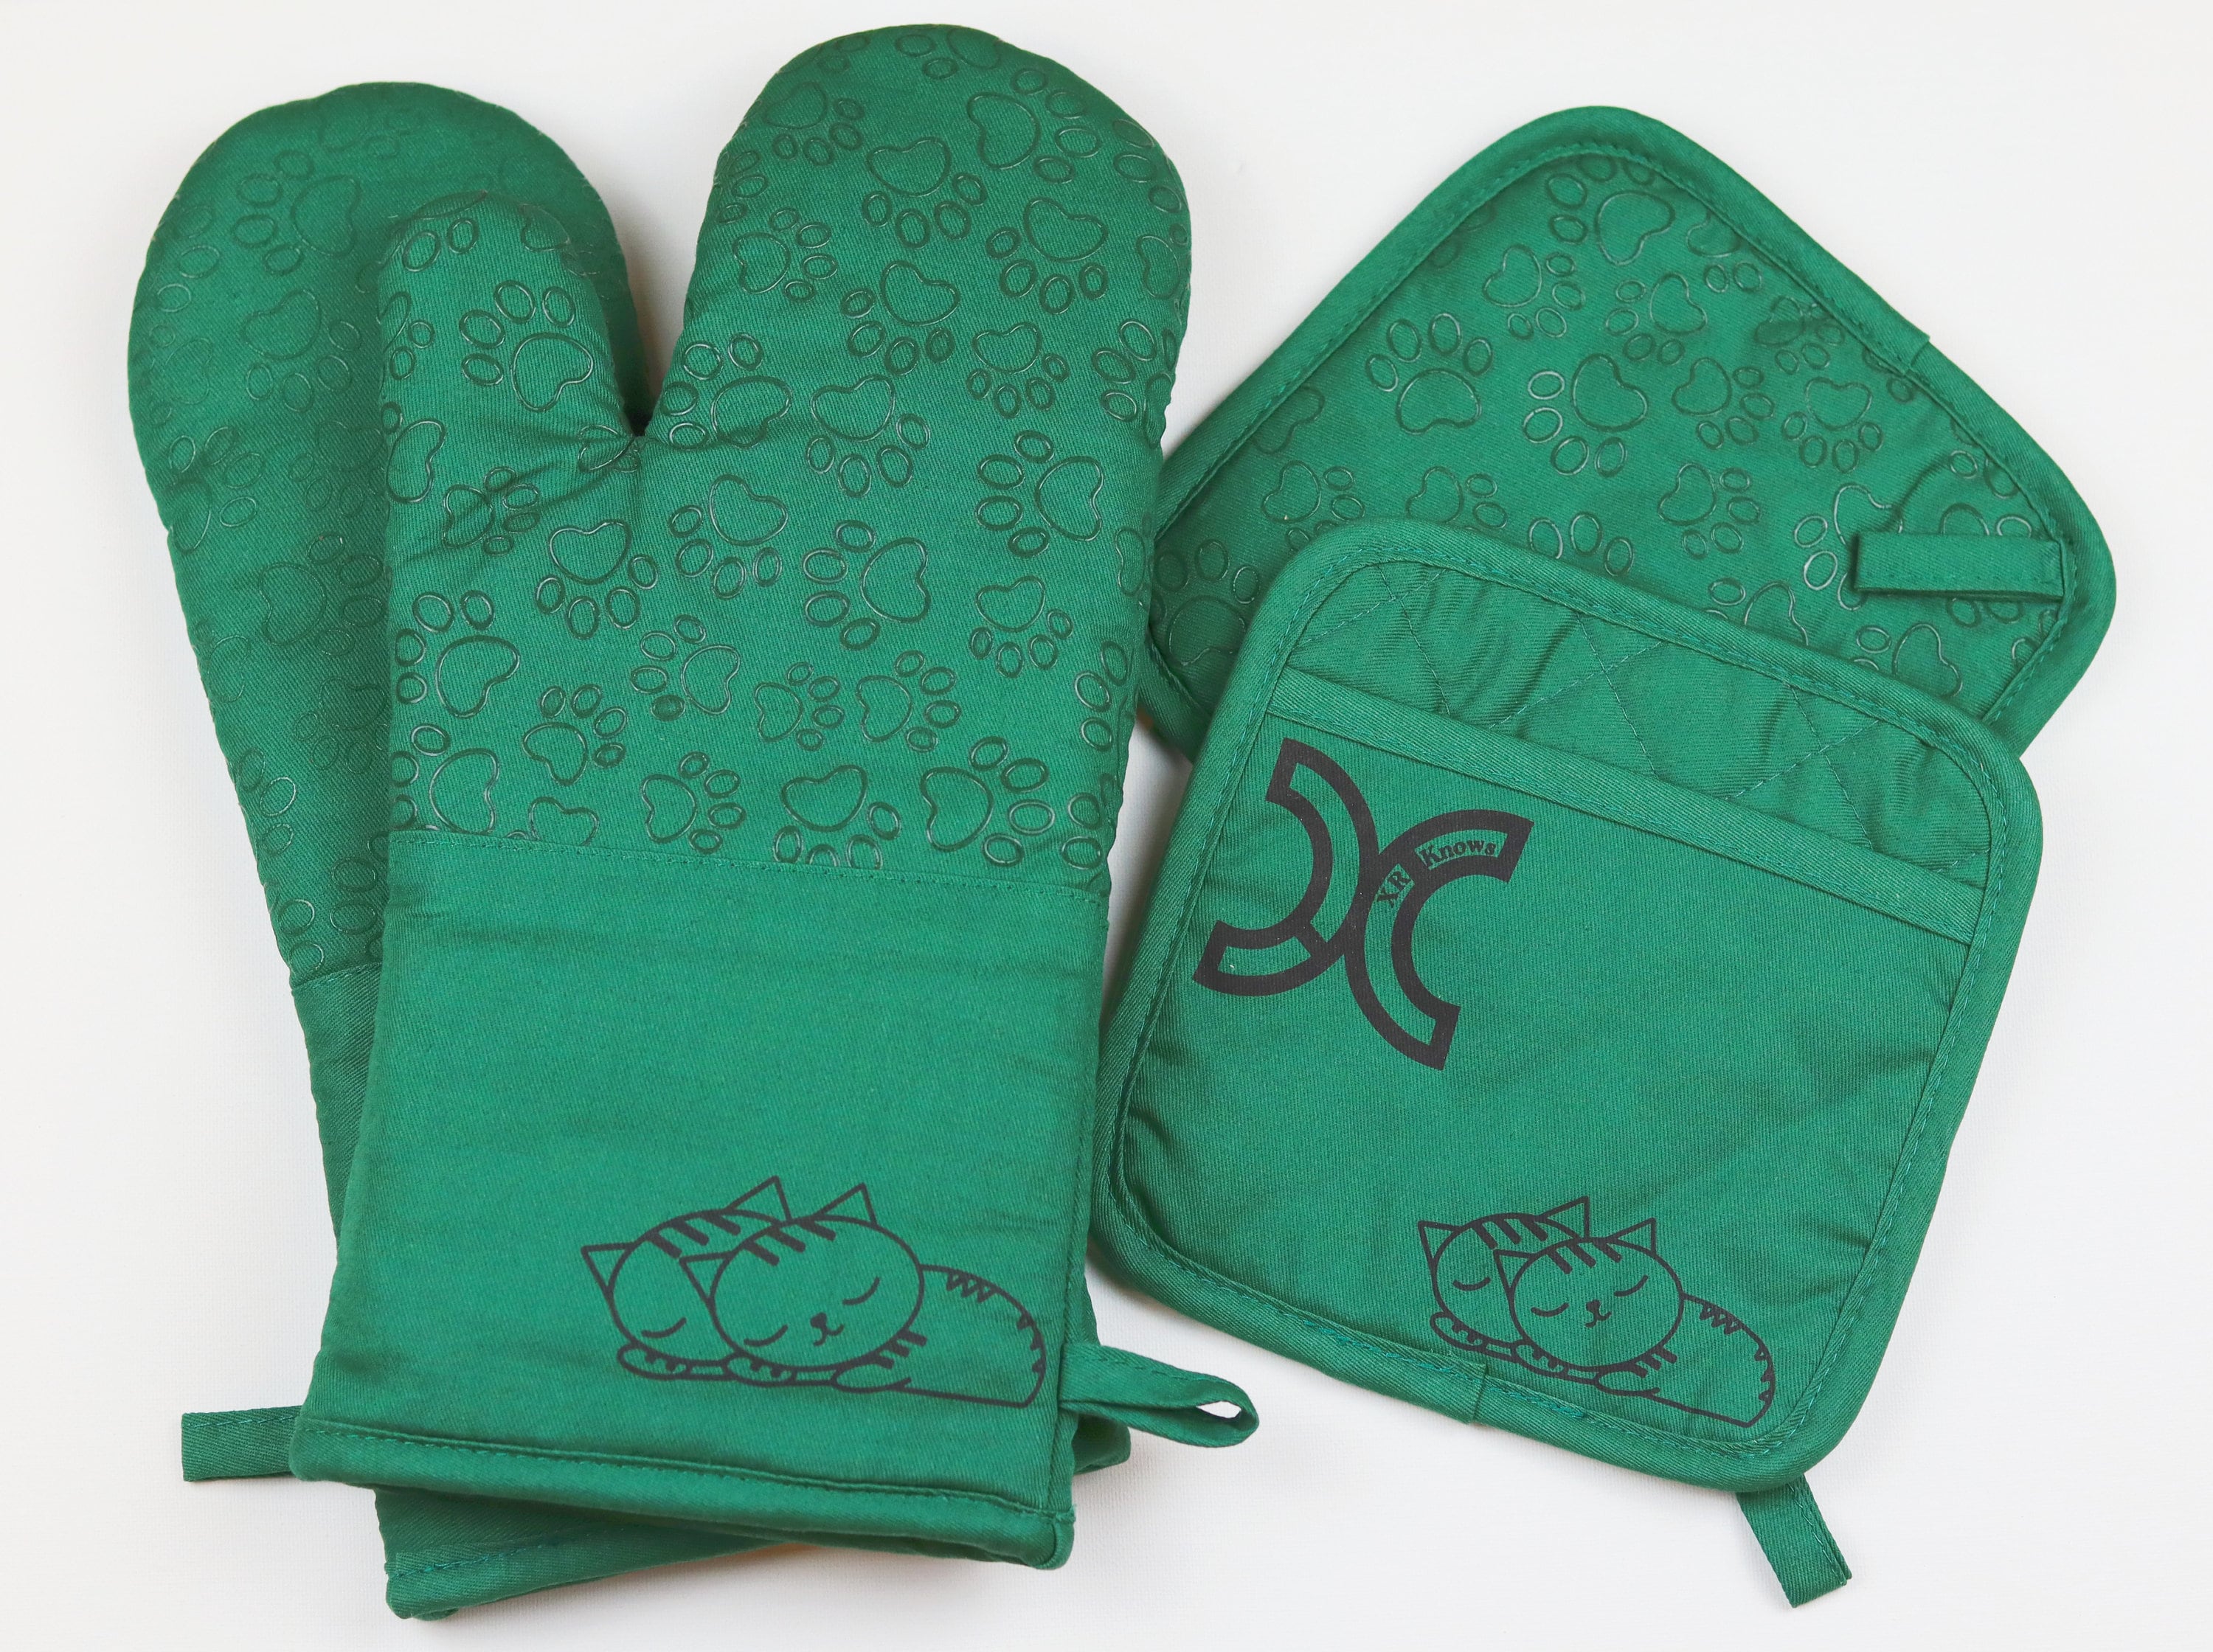 Cute Oven Mitts - it is Made in Europe